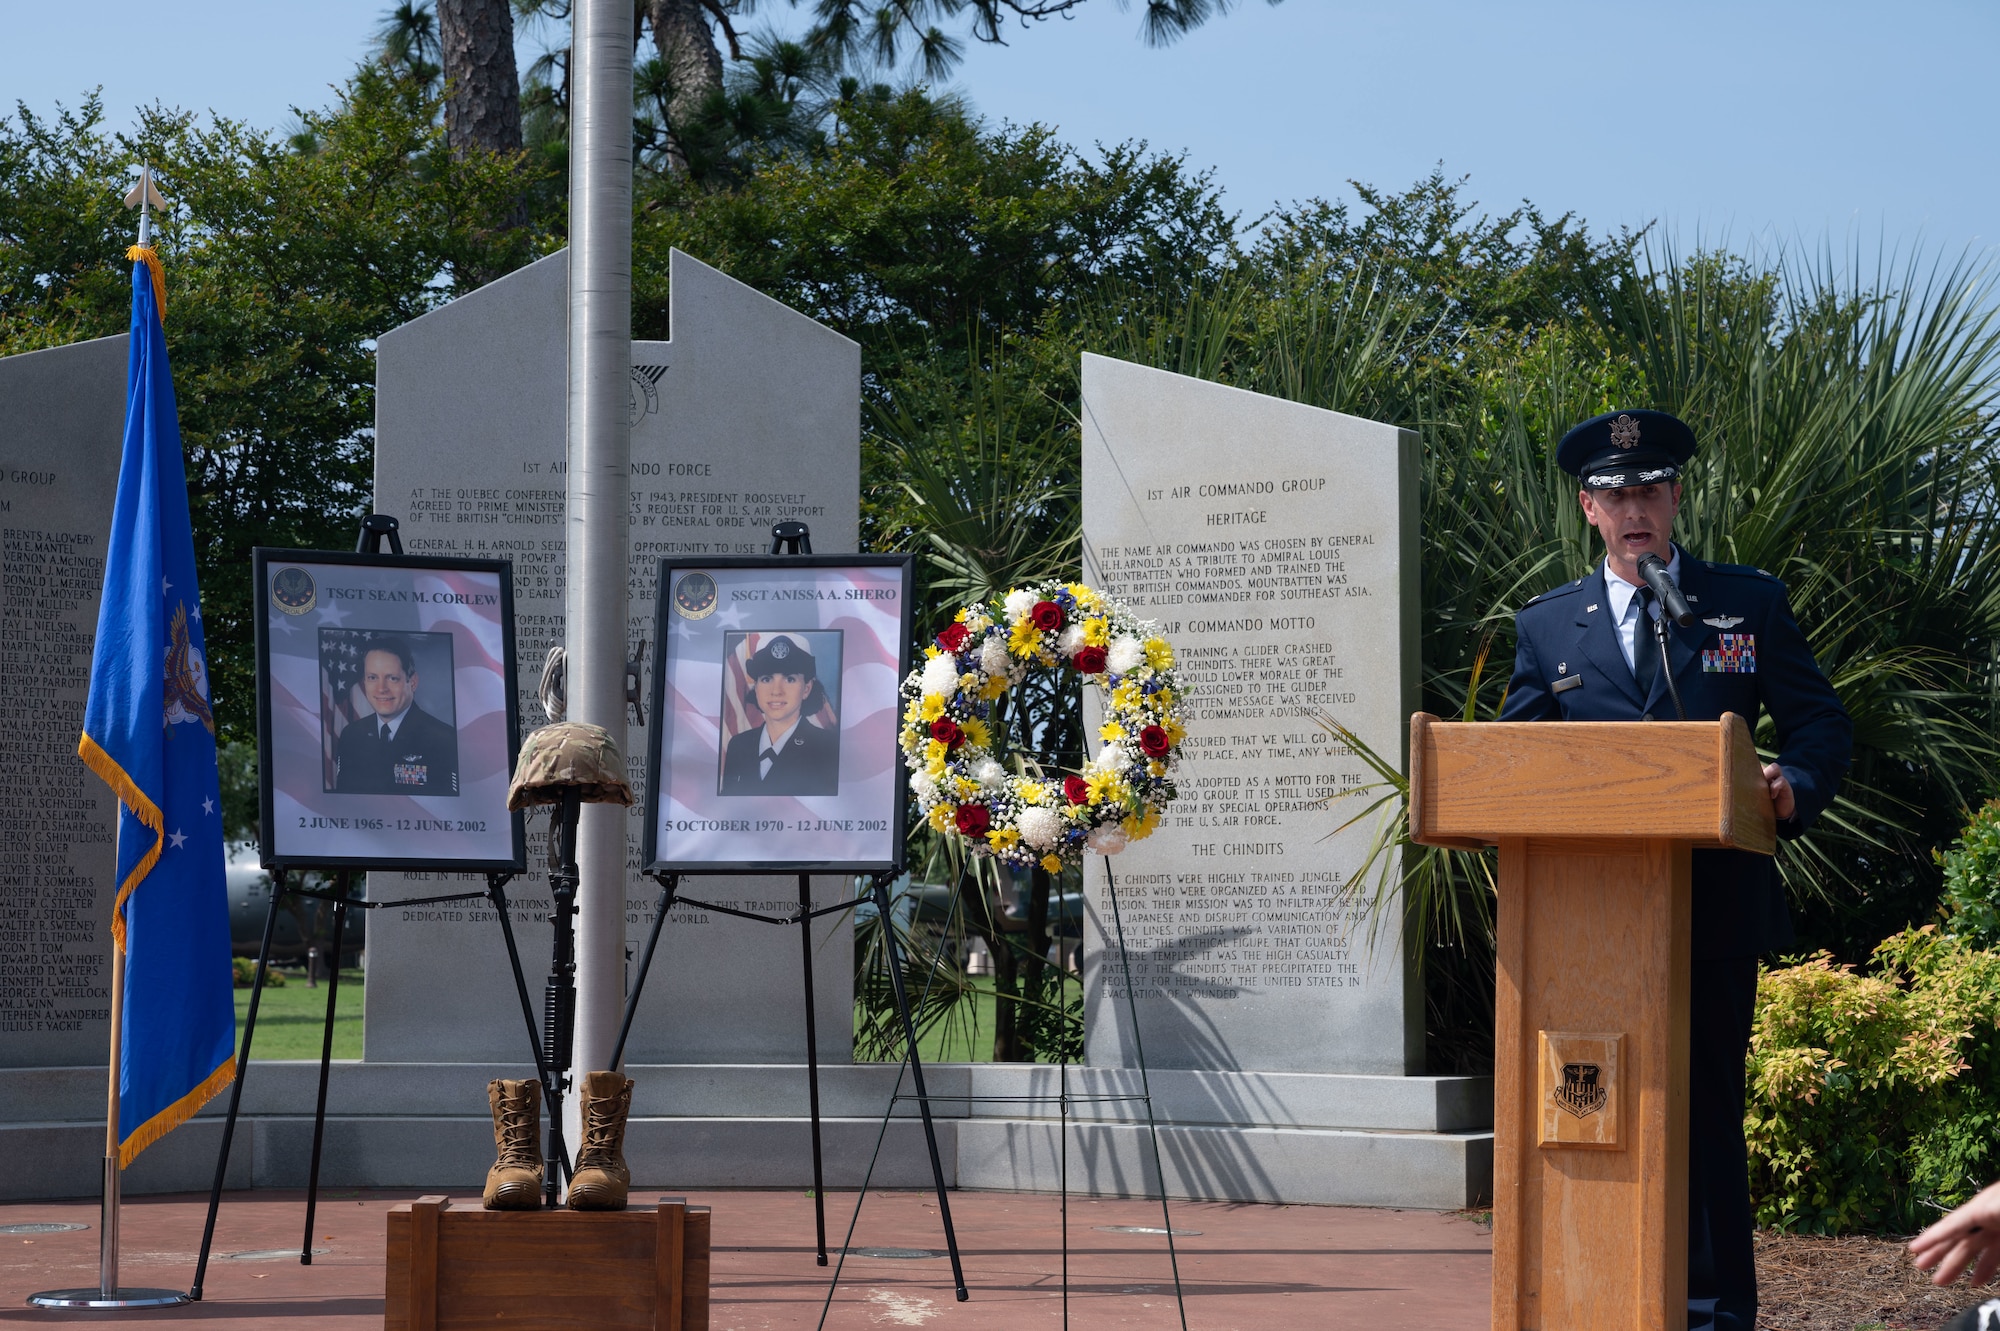 U.S. Air Force Lt. Col. Adam Schmidt, commander of the 15th Special Operations Squadron, gives a speech during a ceremony marking the 20th anniversary of Chariot 55 at Hurlburt Field, Florida, June 10, 2022.